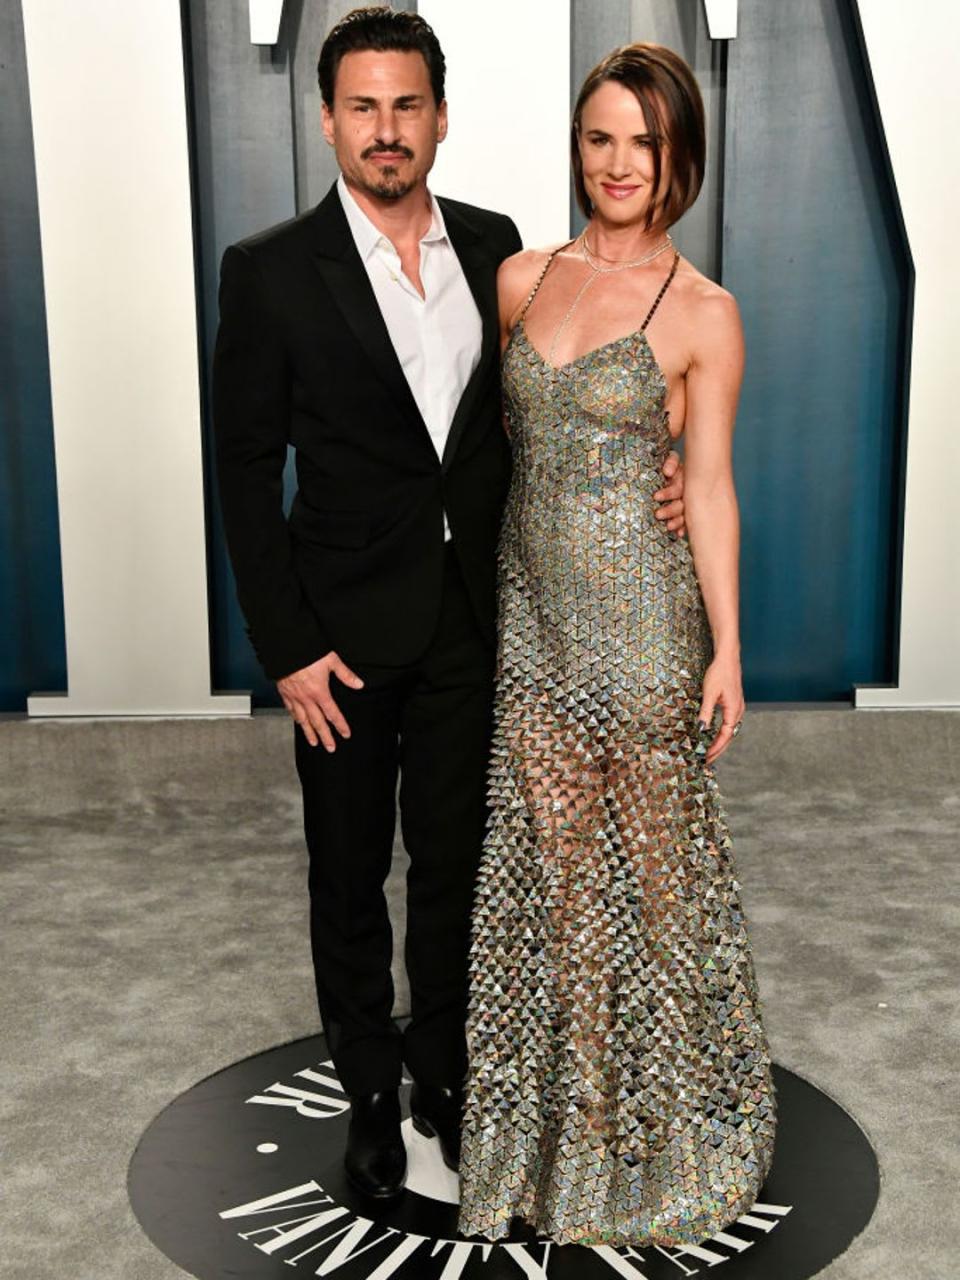 Juliette Lewis and Brad Wilk attending the 2020 Vanity Fair Oscar Party. She is wearing a gold spaghetti strap evening gown while he is in a black suit with a white shirt. 